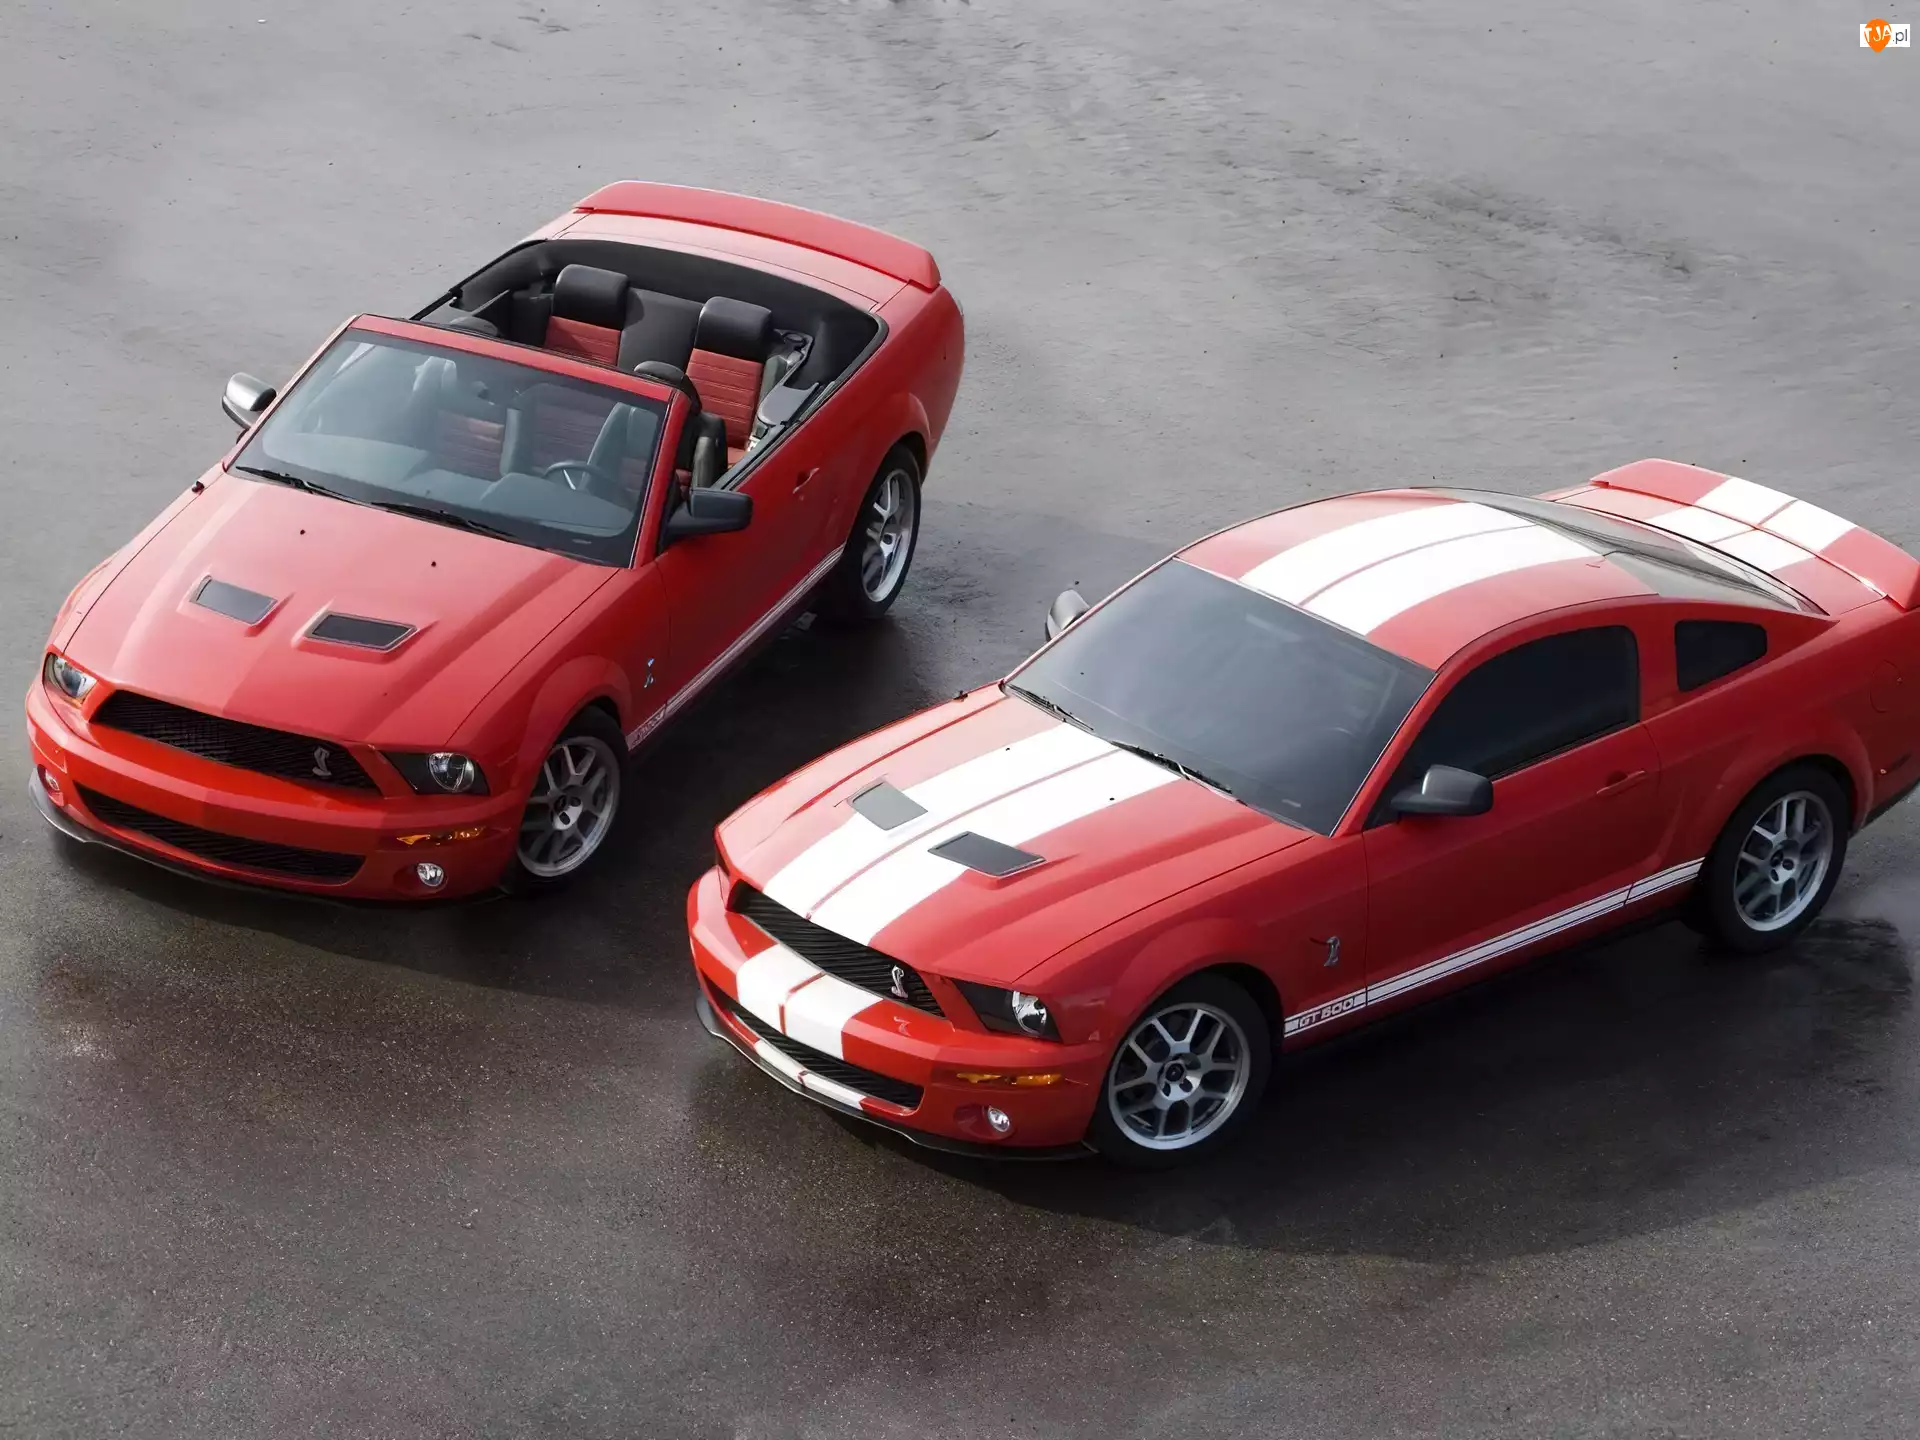 Cabrio, Mustang Shelby, Ford Mustang